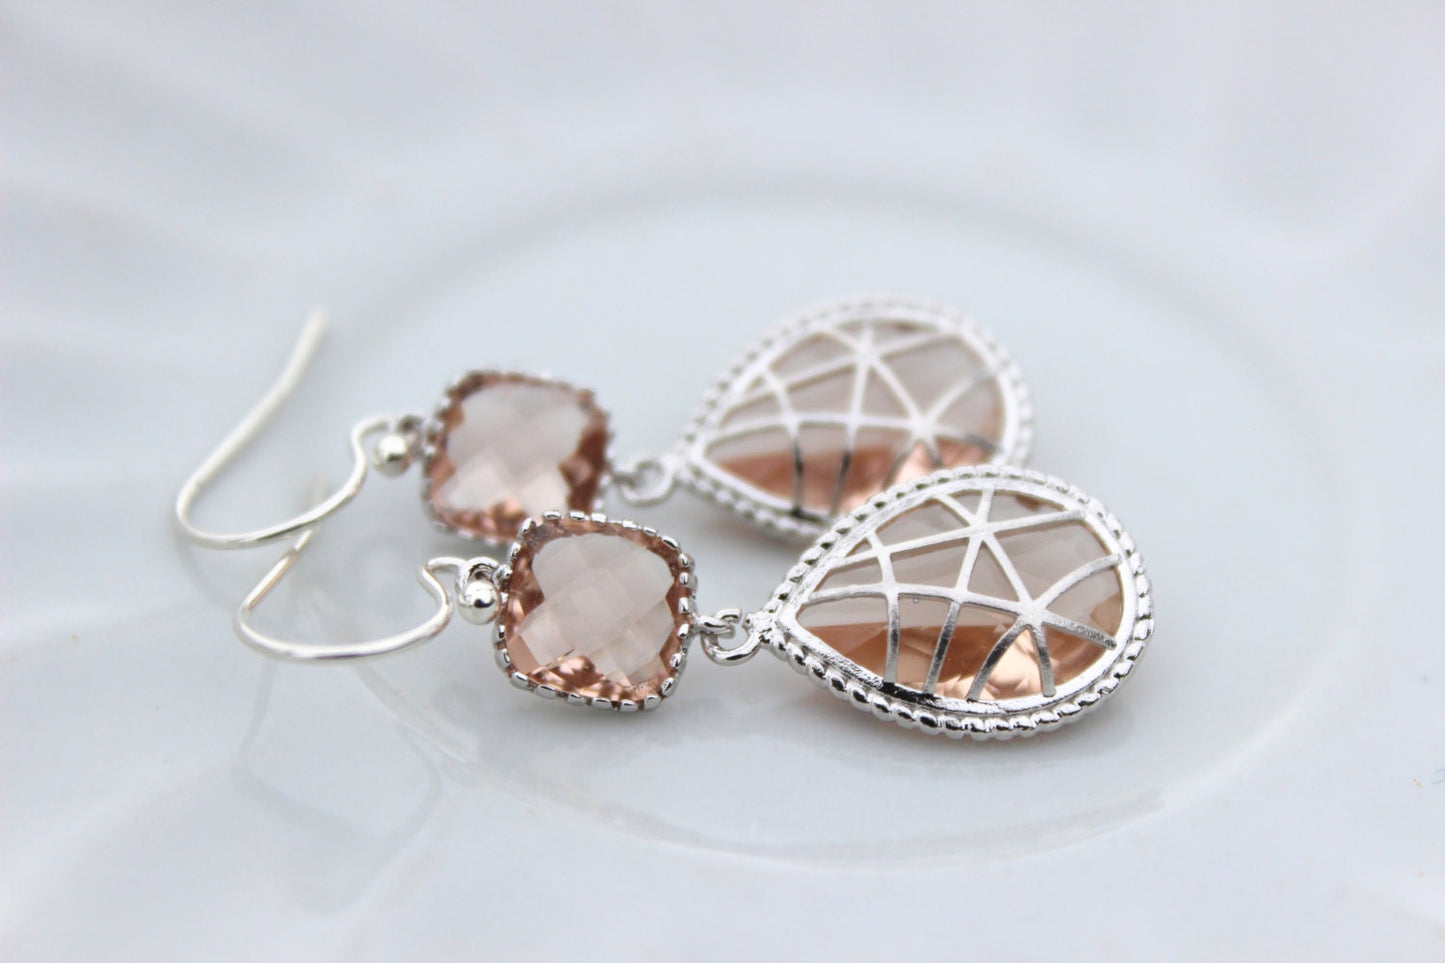 Champagne Peach Earrings Blush Pink Silver Two Tier Twisted Design - Bridesmaid Jewelry - Blush Bridesmaid Earrings Wedding Jewelry Earrings